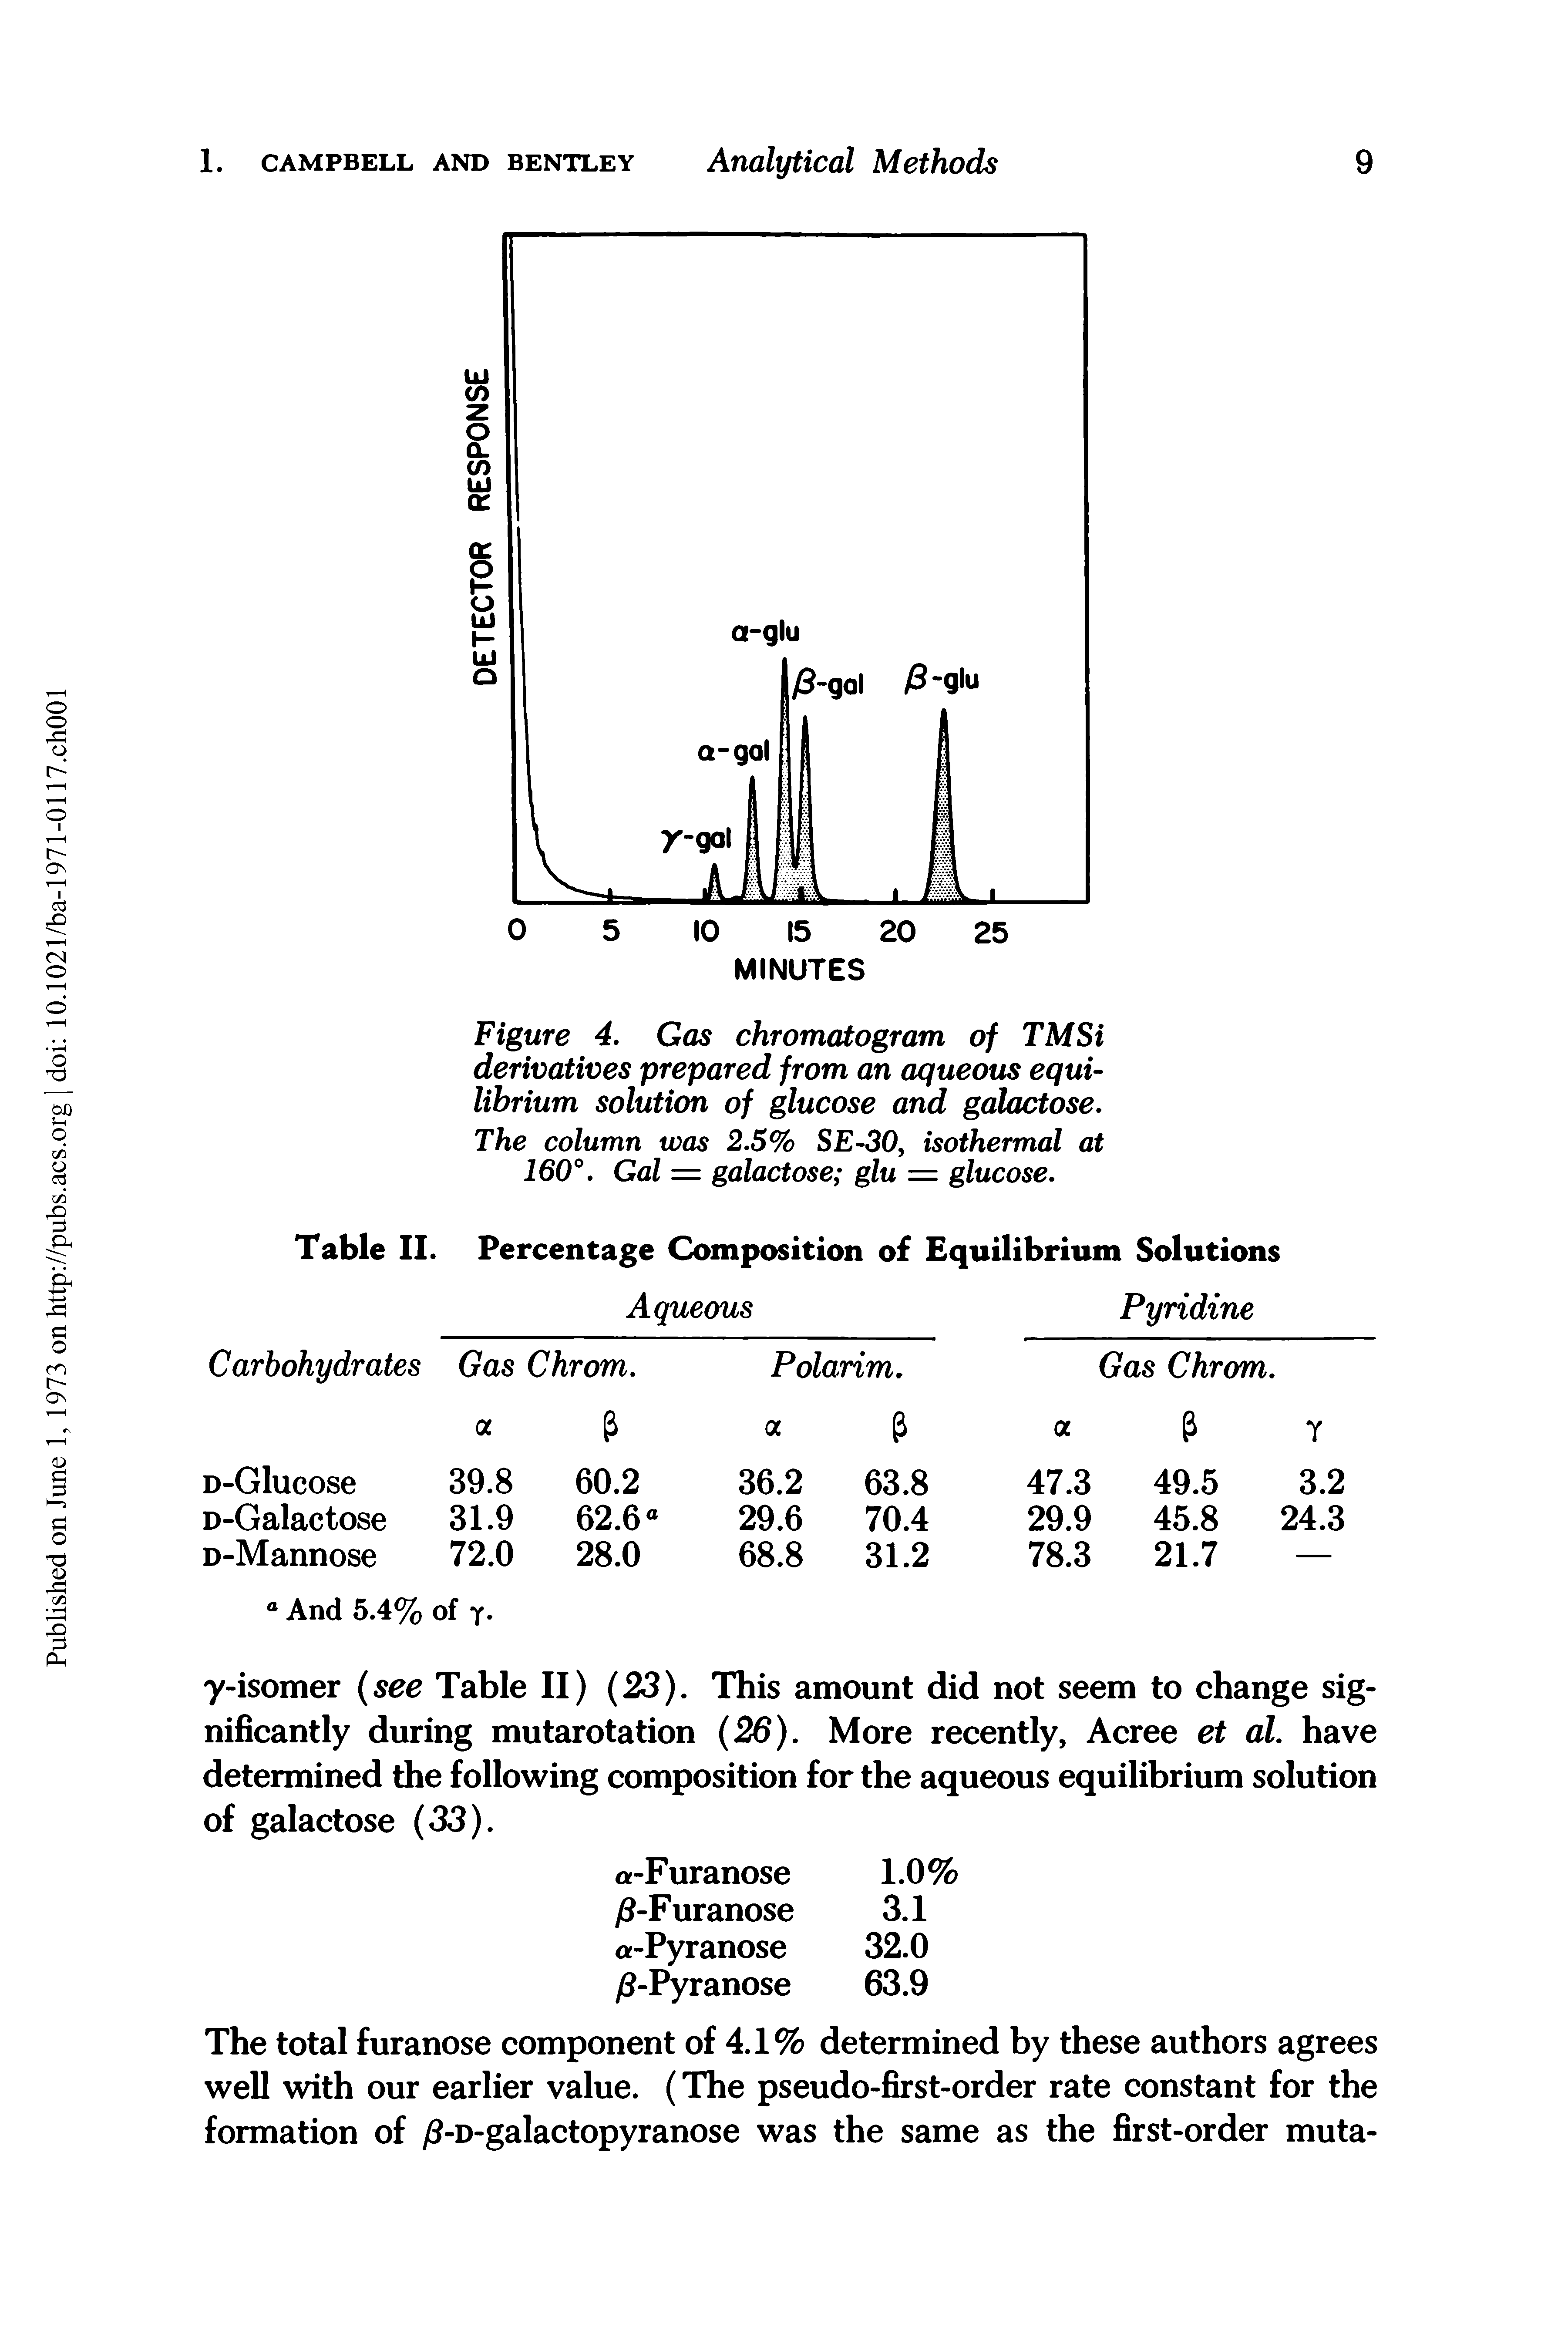 Figure 4. Gas chromatogram of TMSi derivatives prepared from an aqueous equilibrium solution of glucose and galactose. The column was 2.5% SE-30, isothermal at 160°. Gal = galactose glu = glucose.